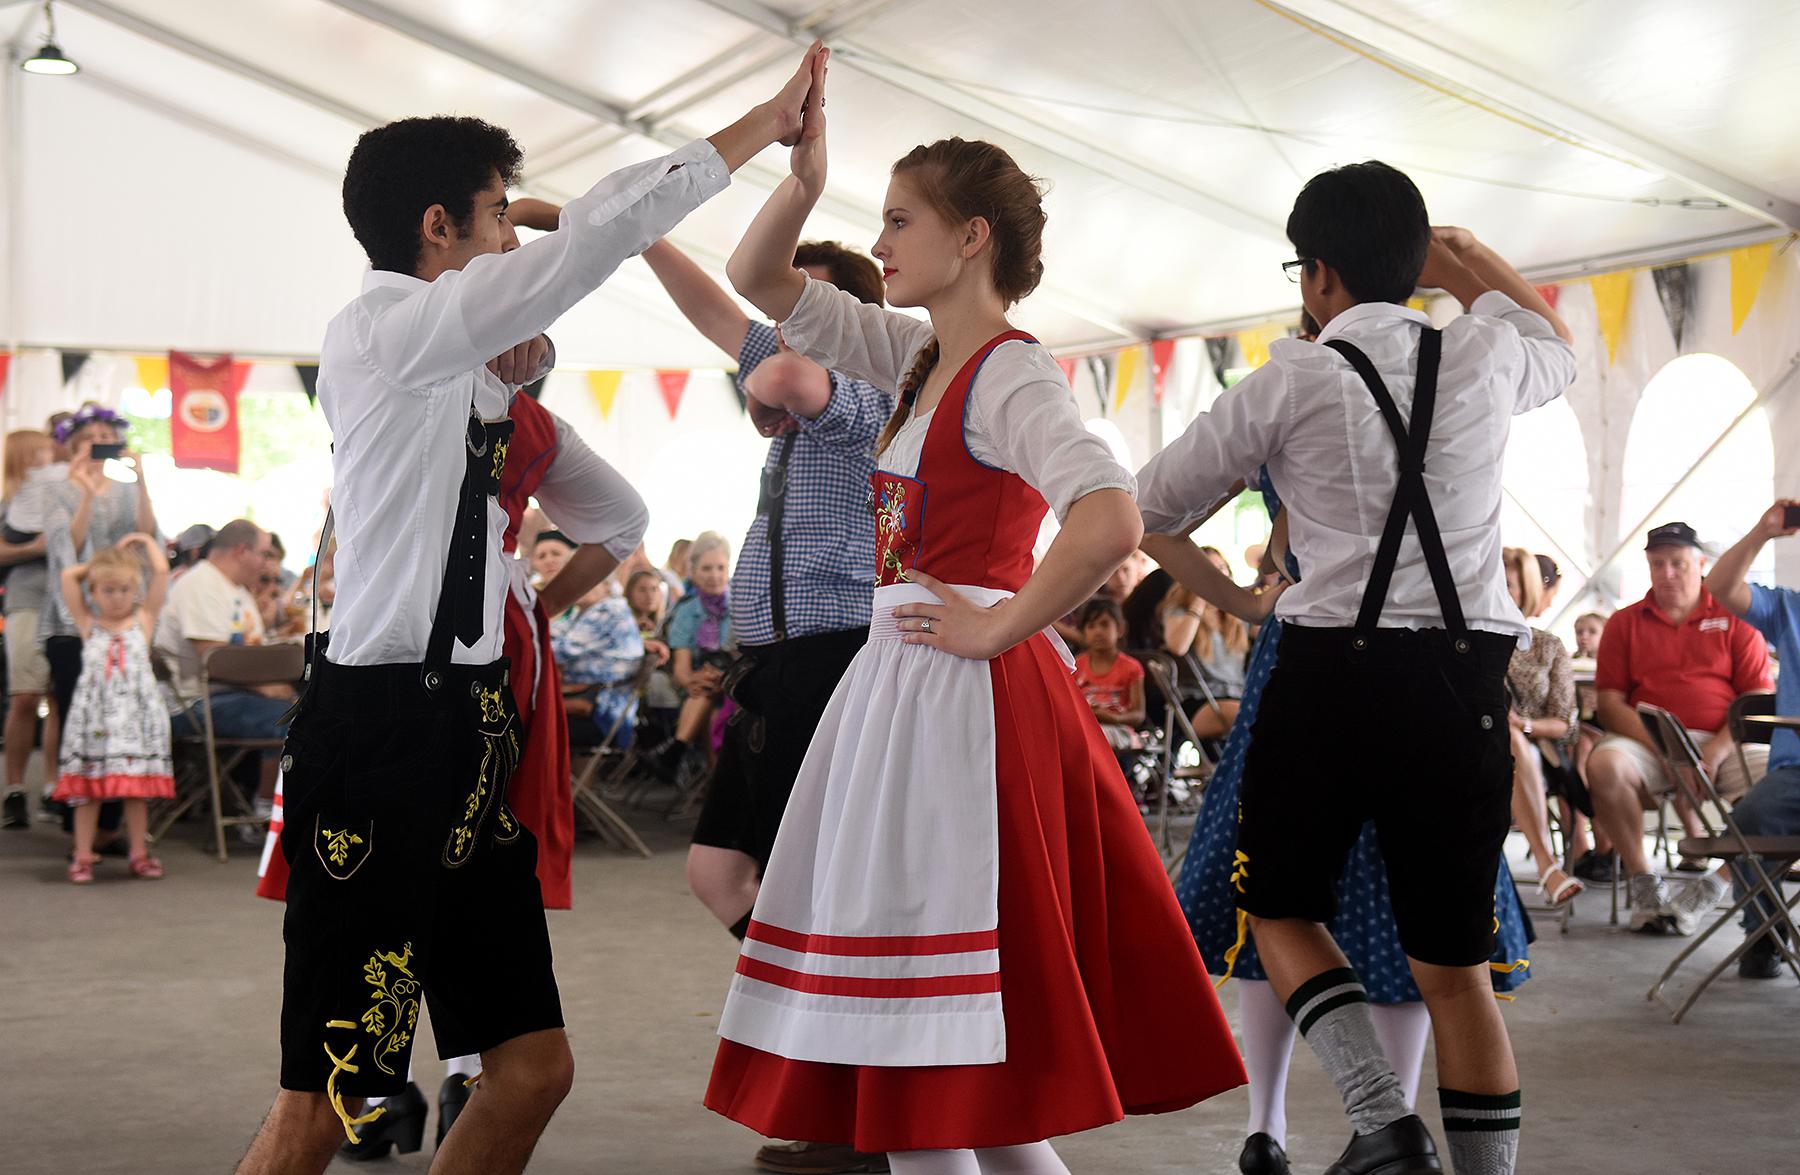 June 414 Tomball German Fest, live music performances planned in